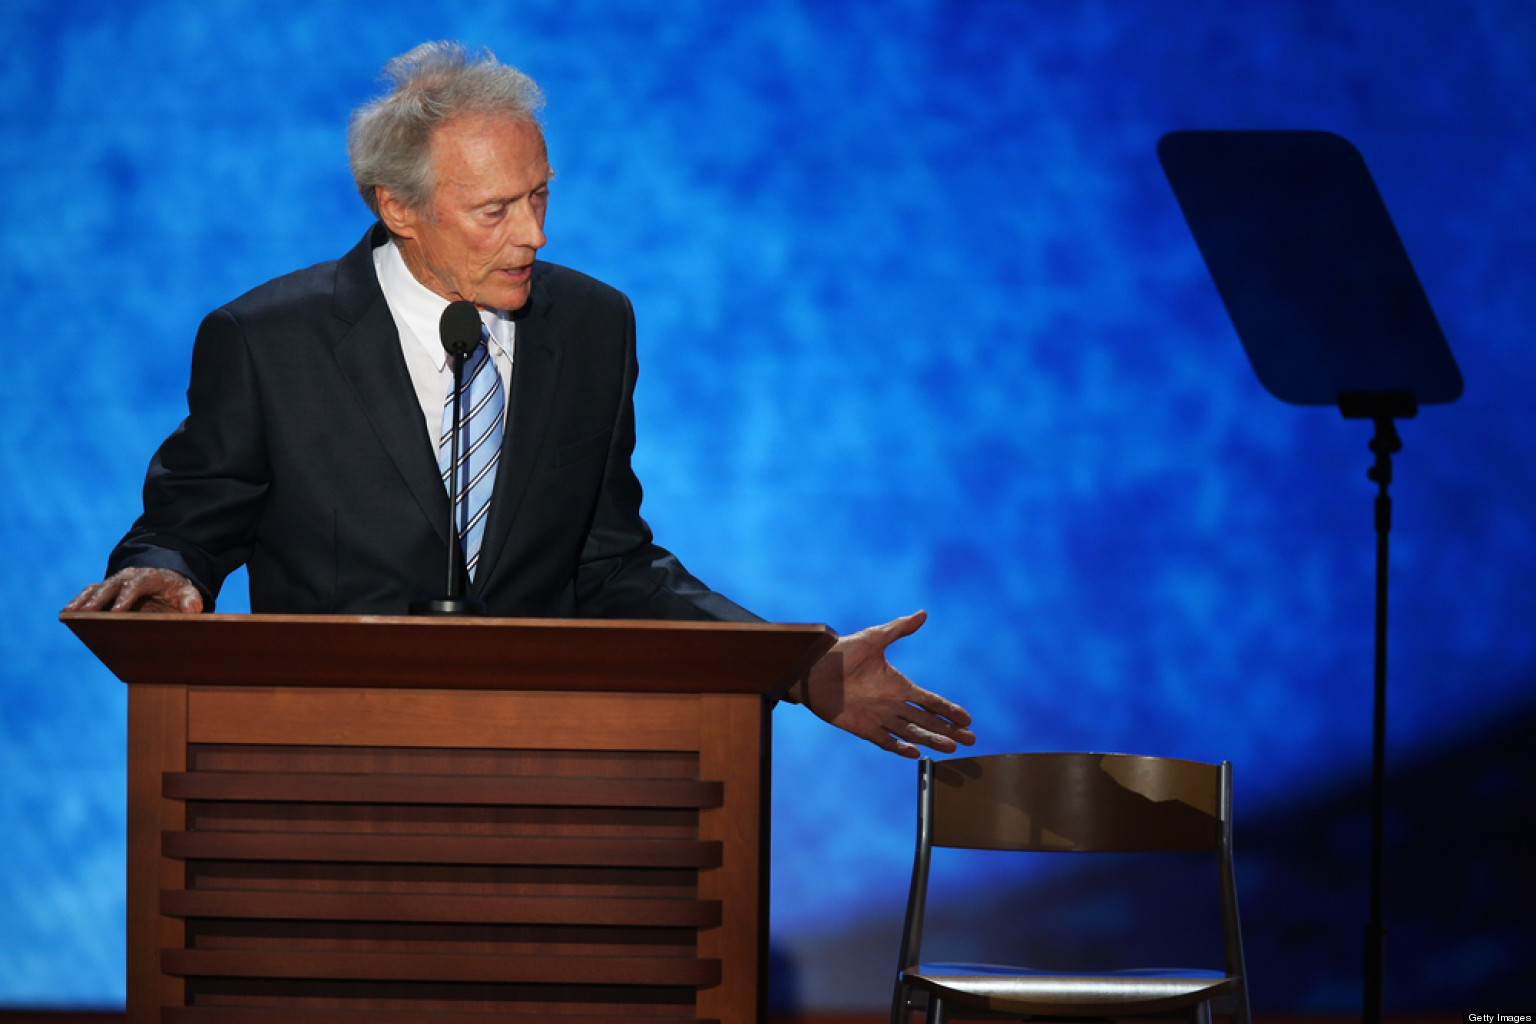 IMAGE(http://i.huffpost.com/gen/1167376/images/o-CLINT-EASTWOOD-EMPTY-CHAIR-facebook.jpg)